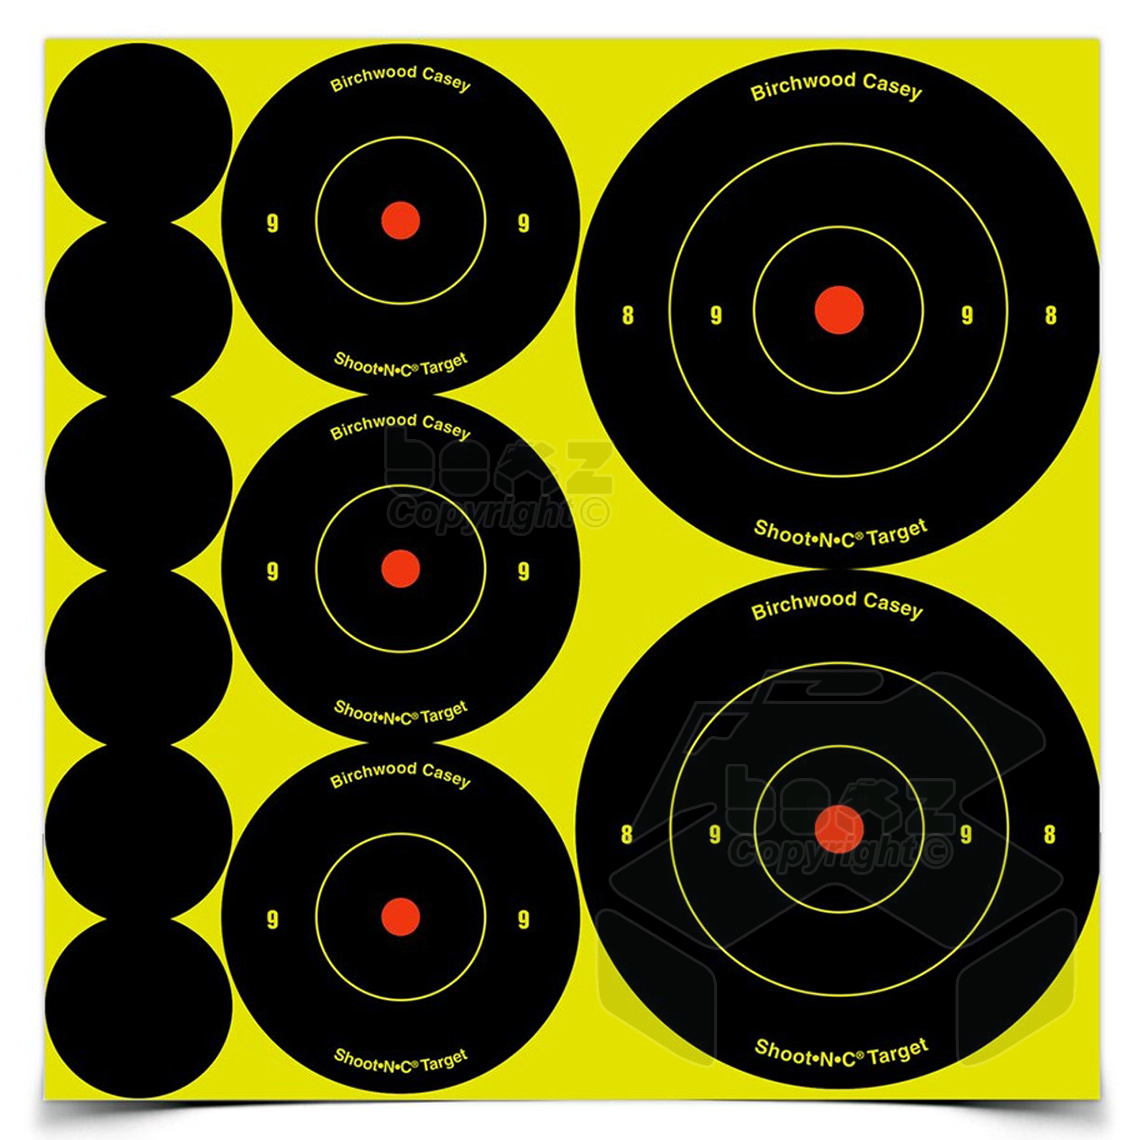 Birchwood Casey Shoot-N-C Targets Mixed Pack 12 x 60, 2" x 30 and 3" x 20